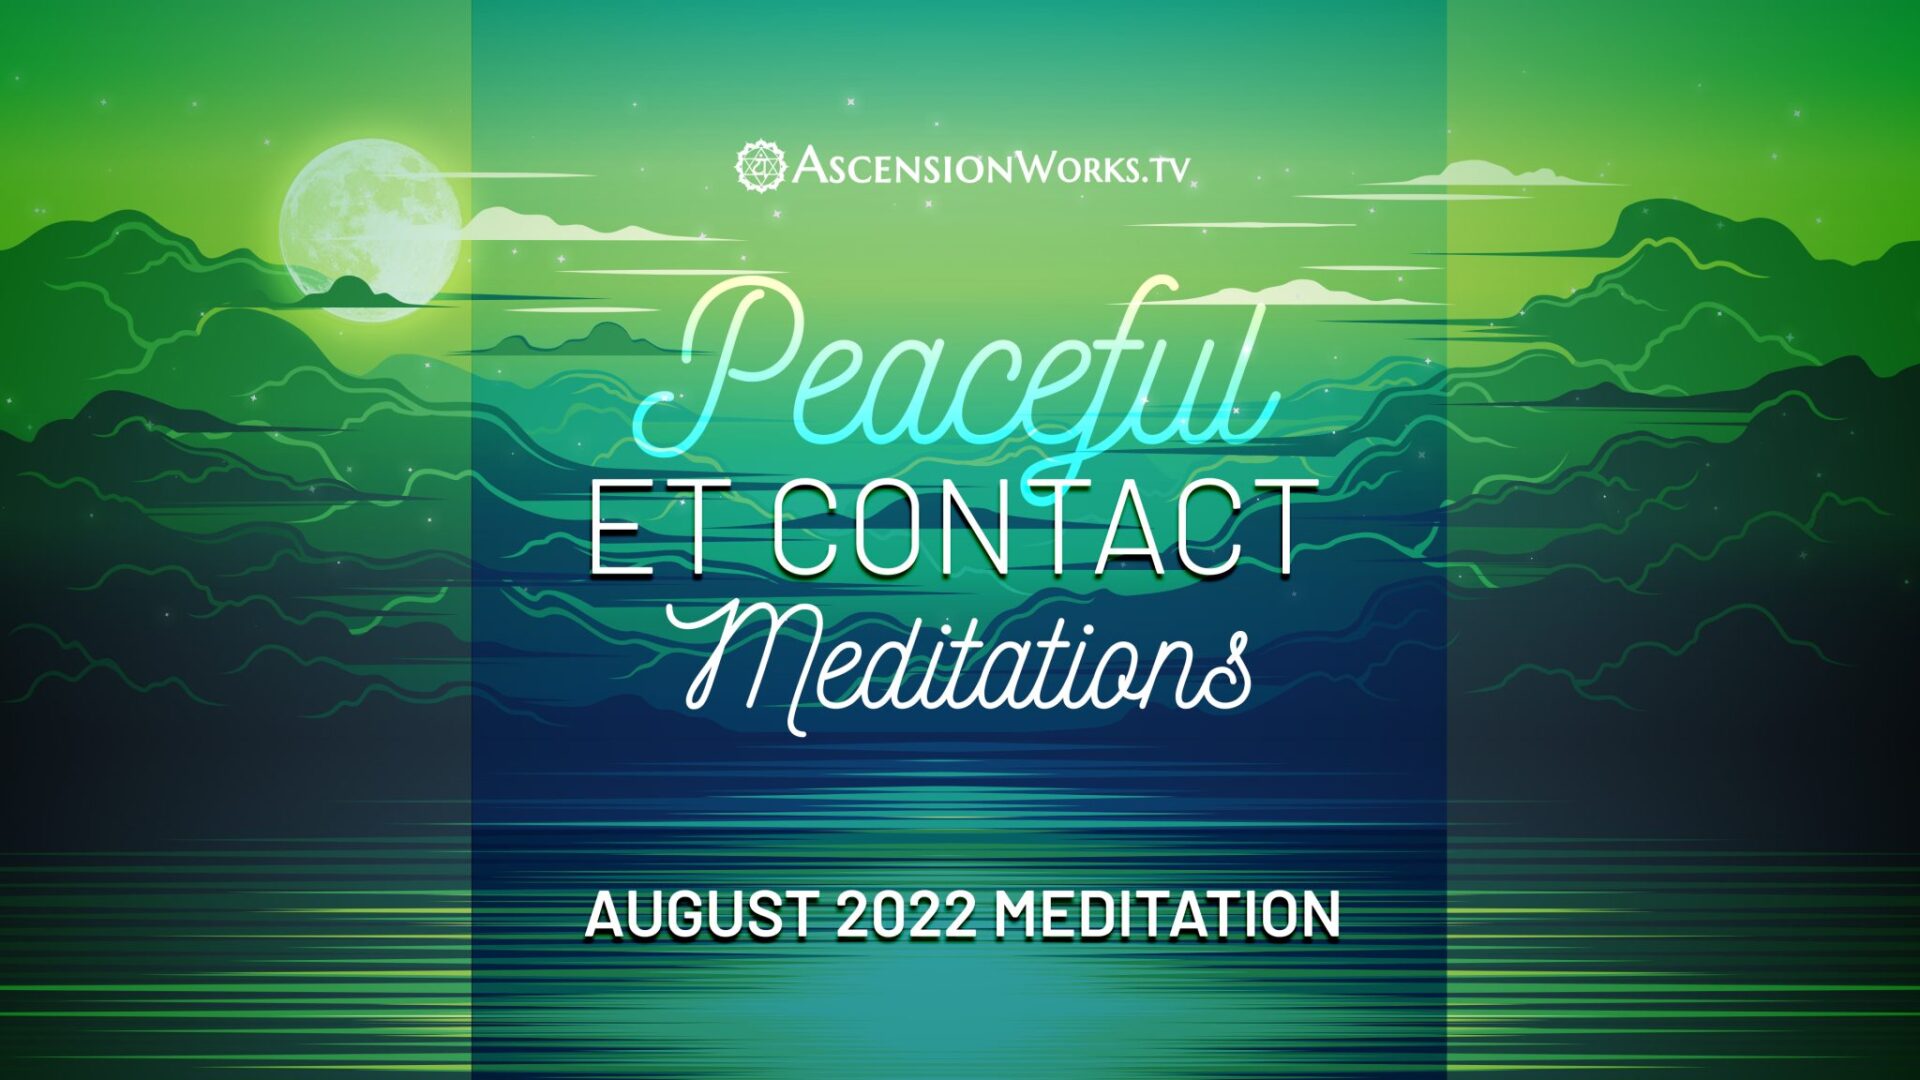 Peaceful ET Contact Meditations AUGUST 2022